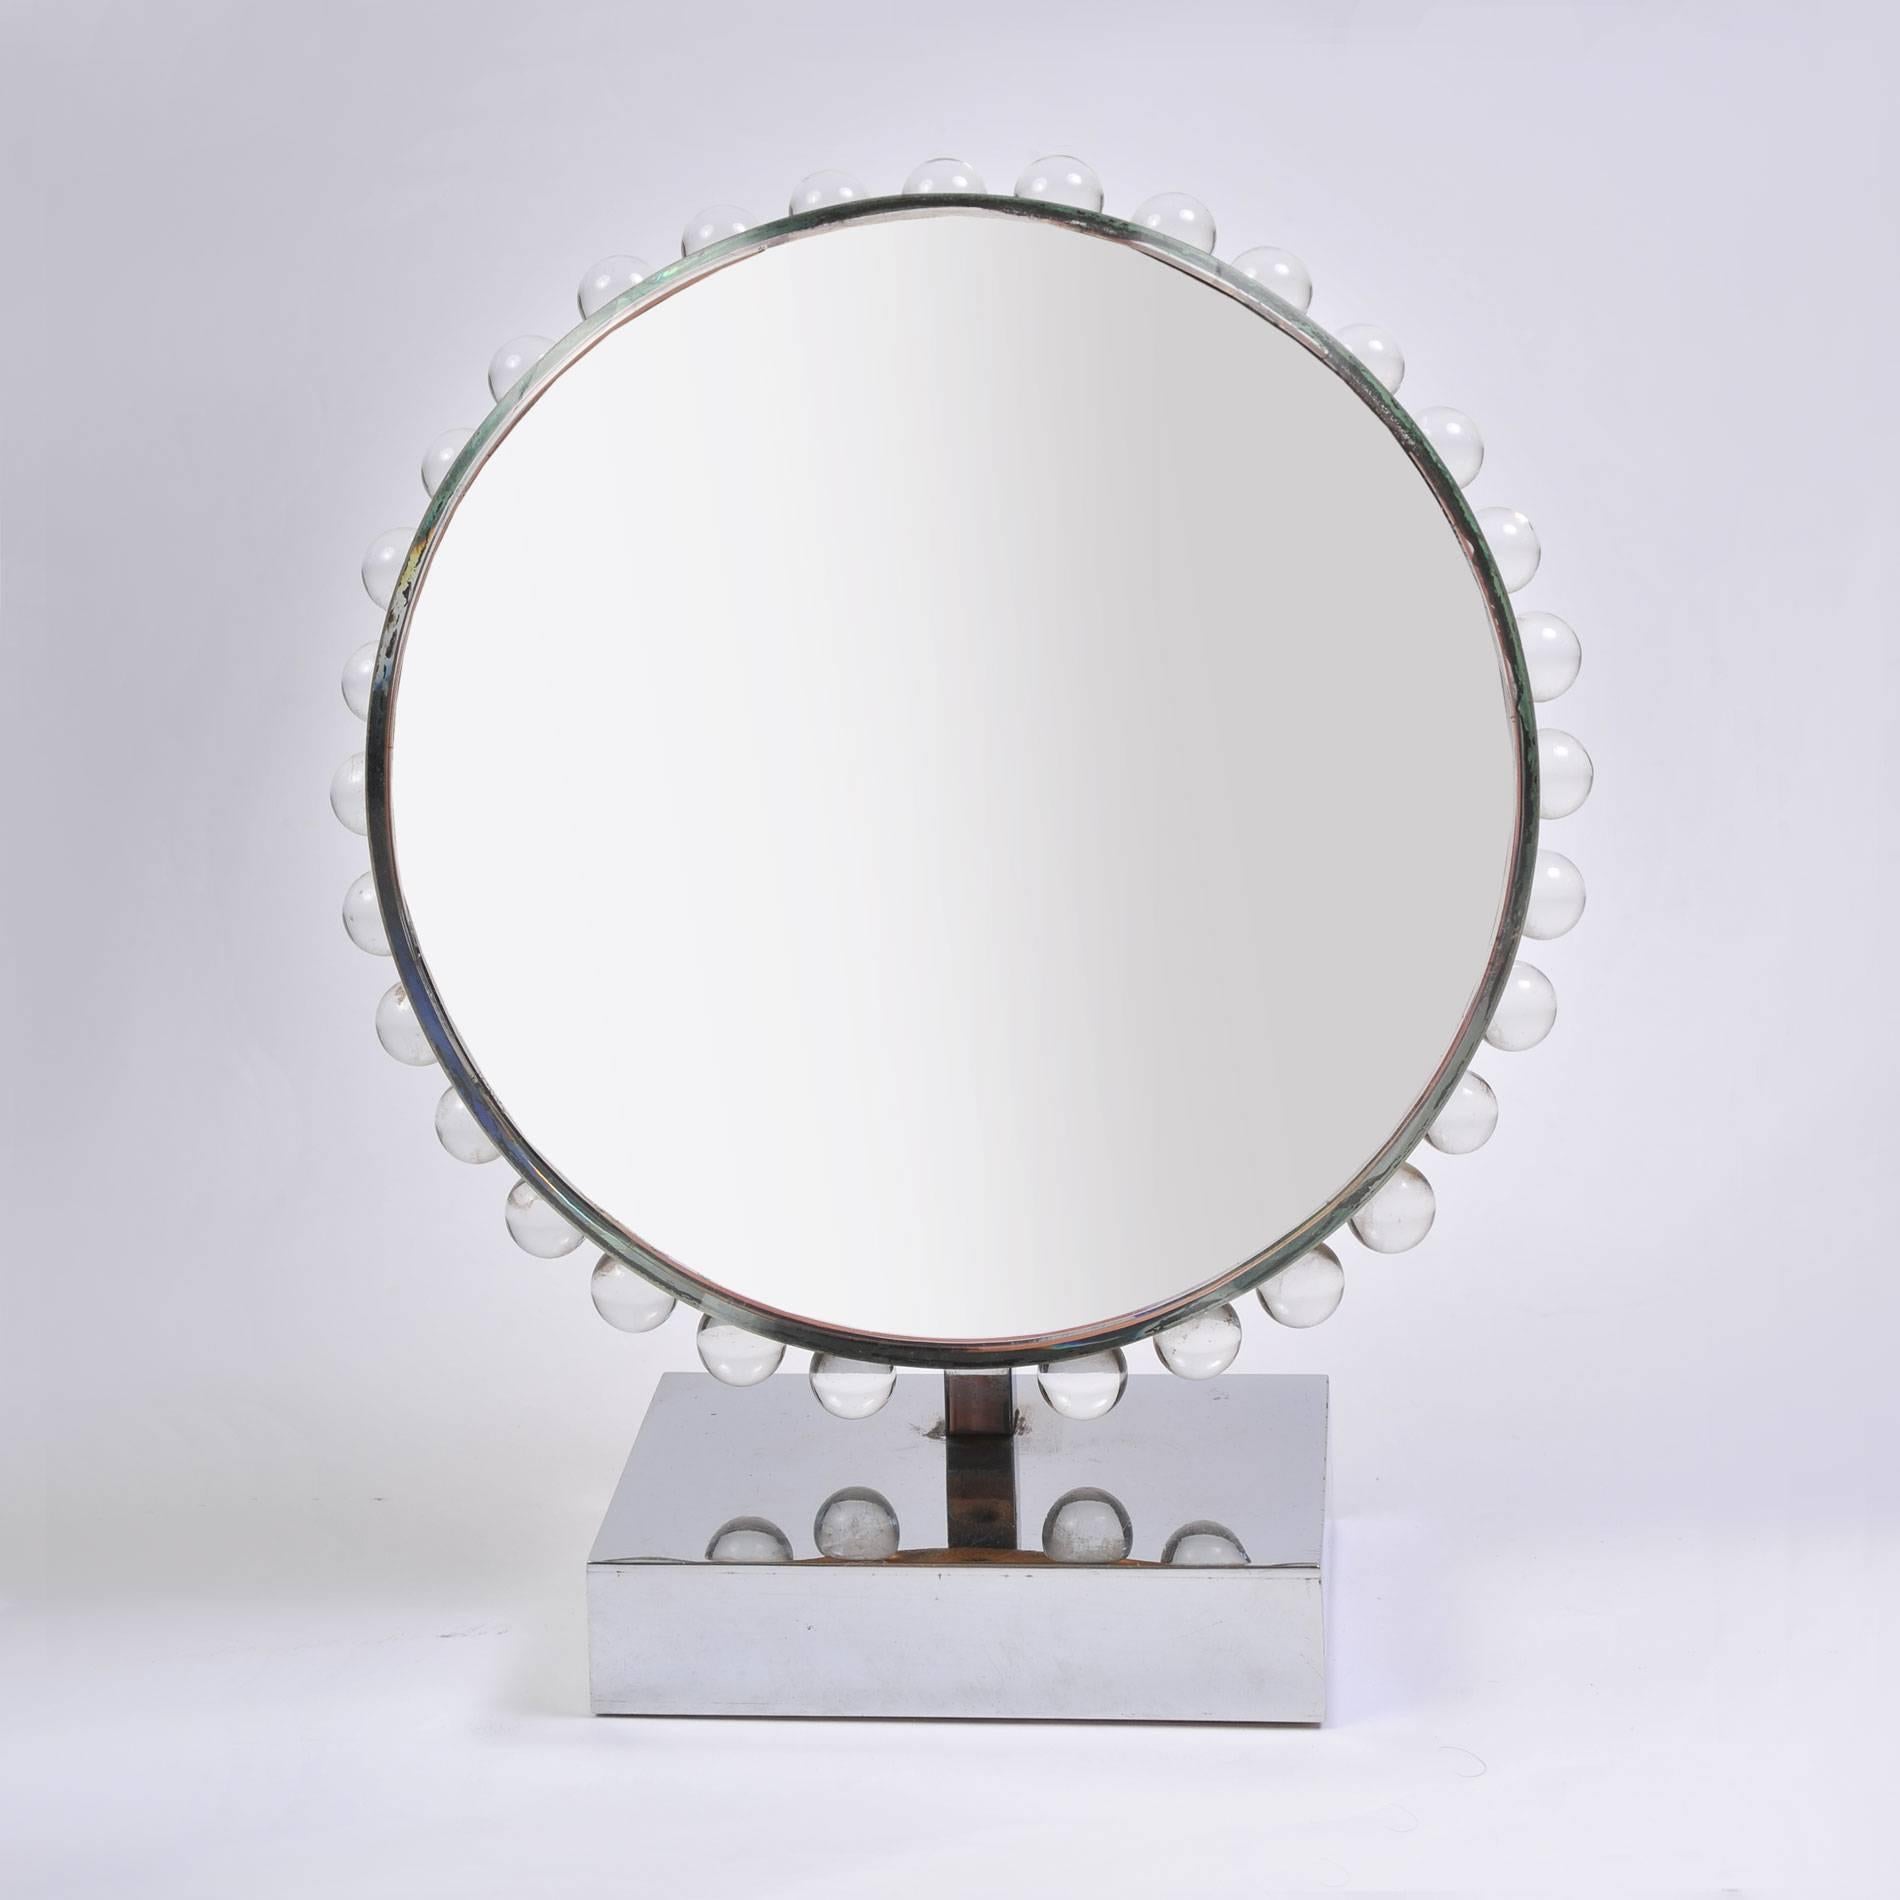 Circular mirror framed by glass balls. Sits on square chrome base.